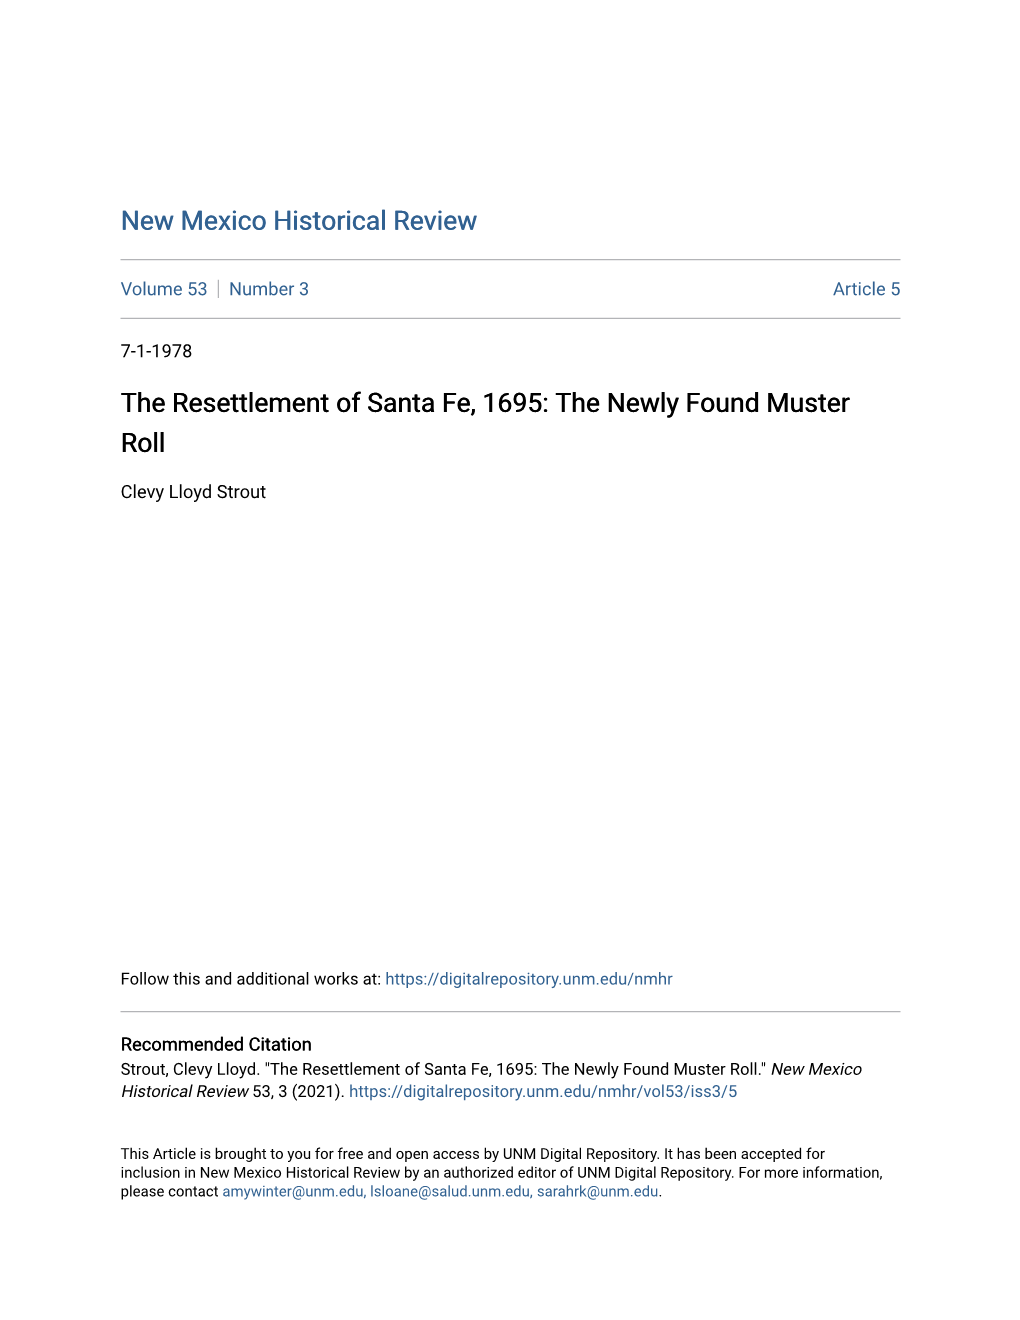 The Resettlement of Santa Fe, 1695: the Newly Found Muster Roll